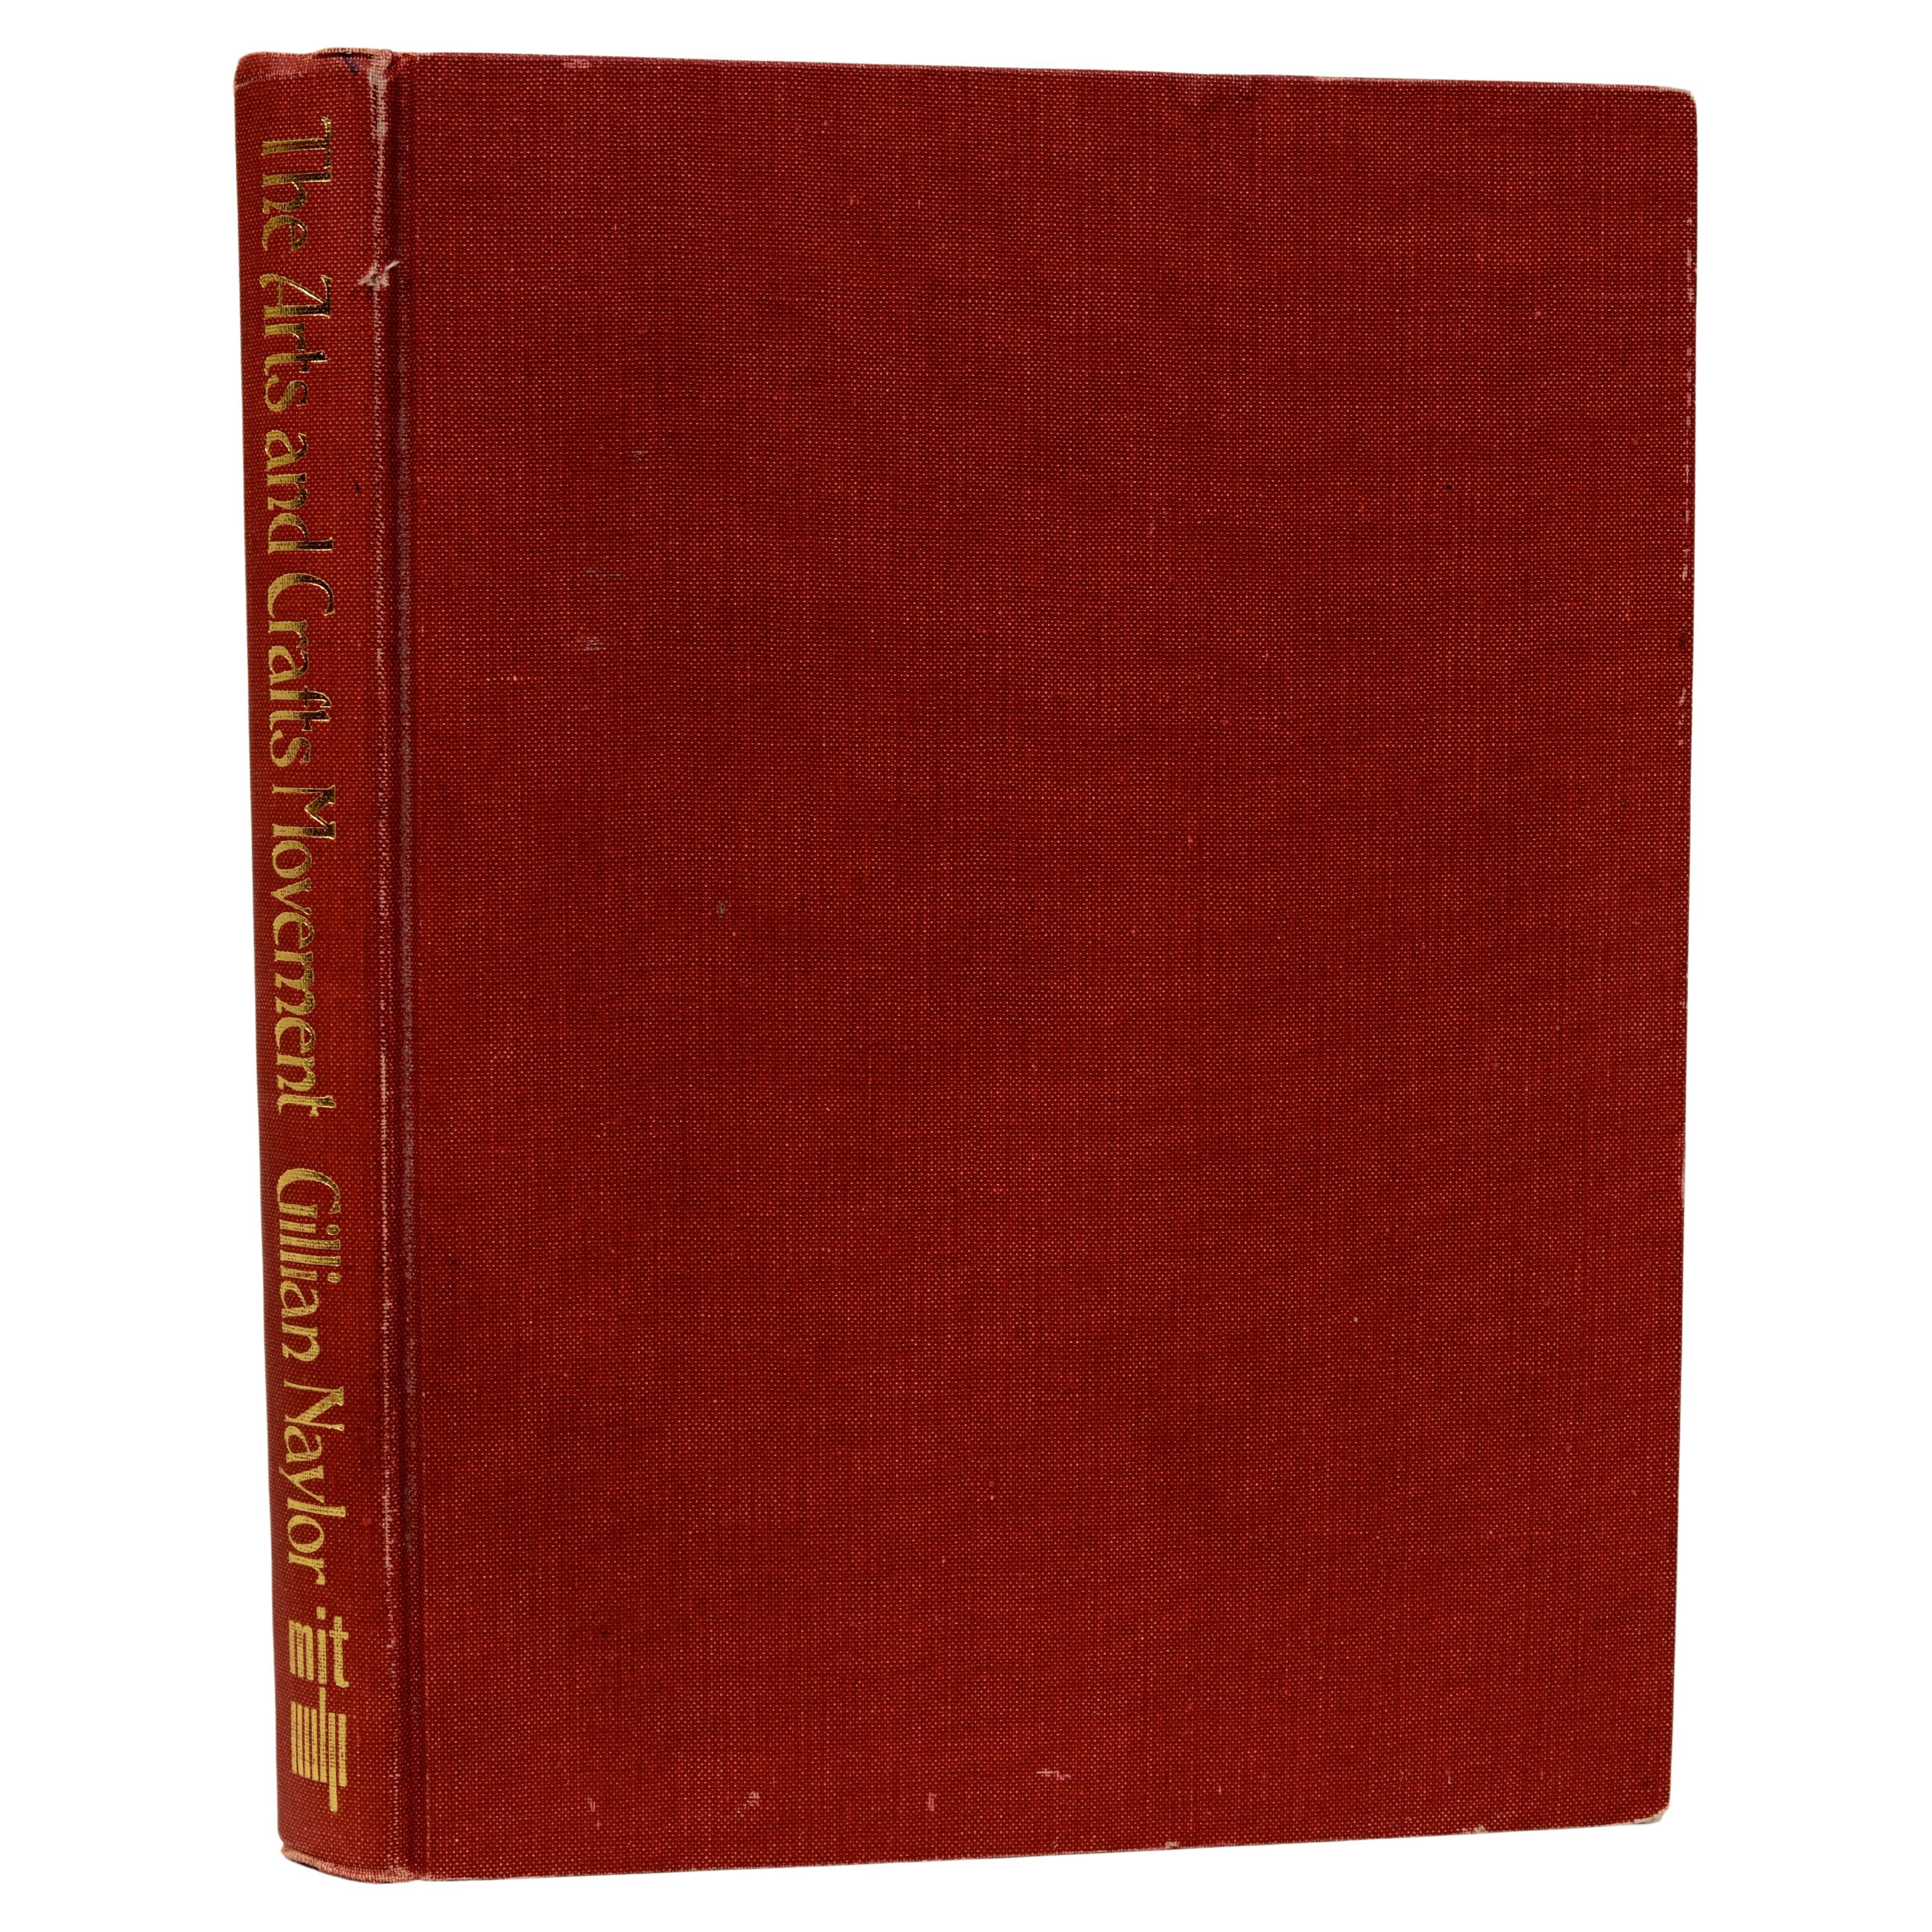 Arts and Crafts Movement: a Study of Its Sources, Ideals and Influence on Design For Sale